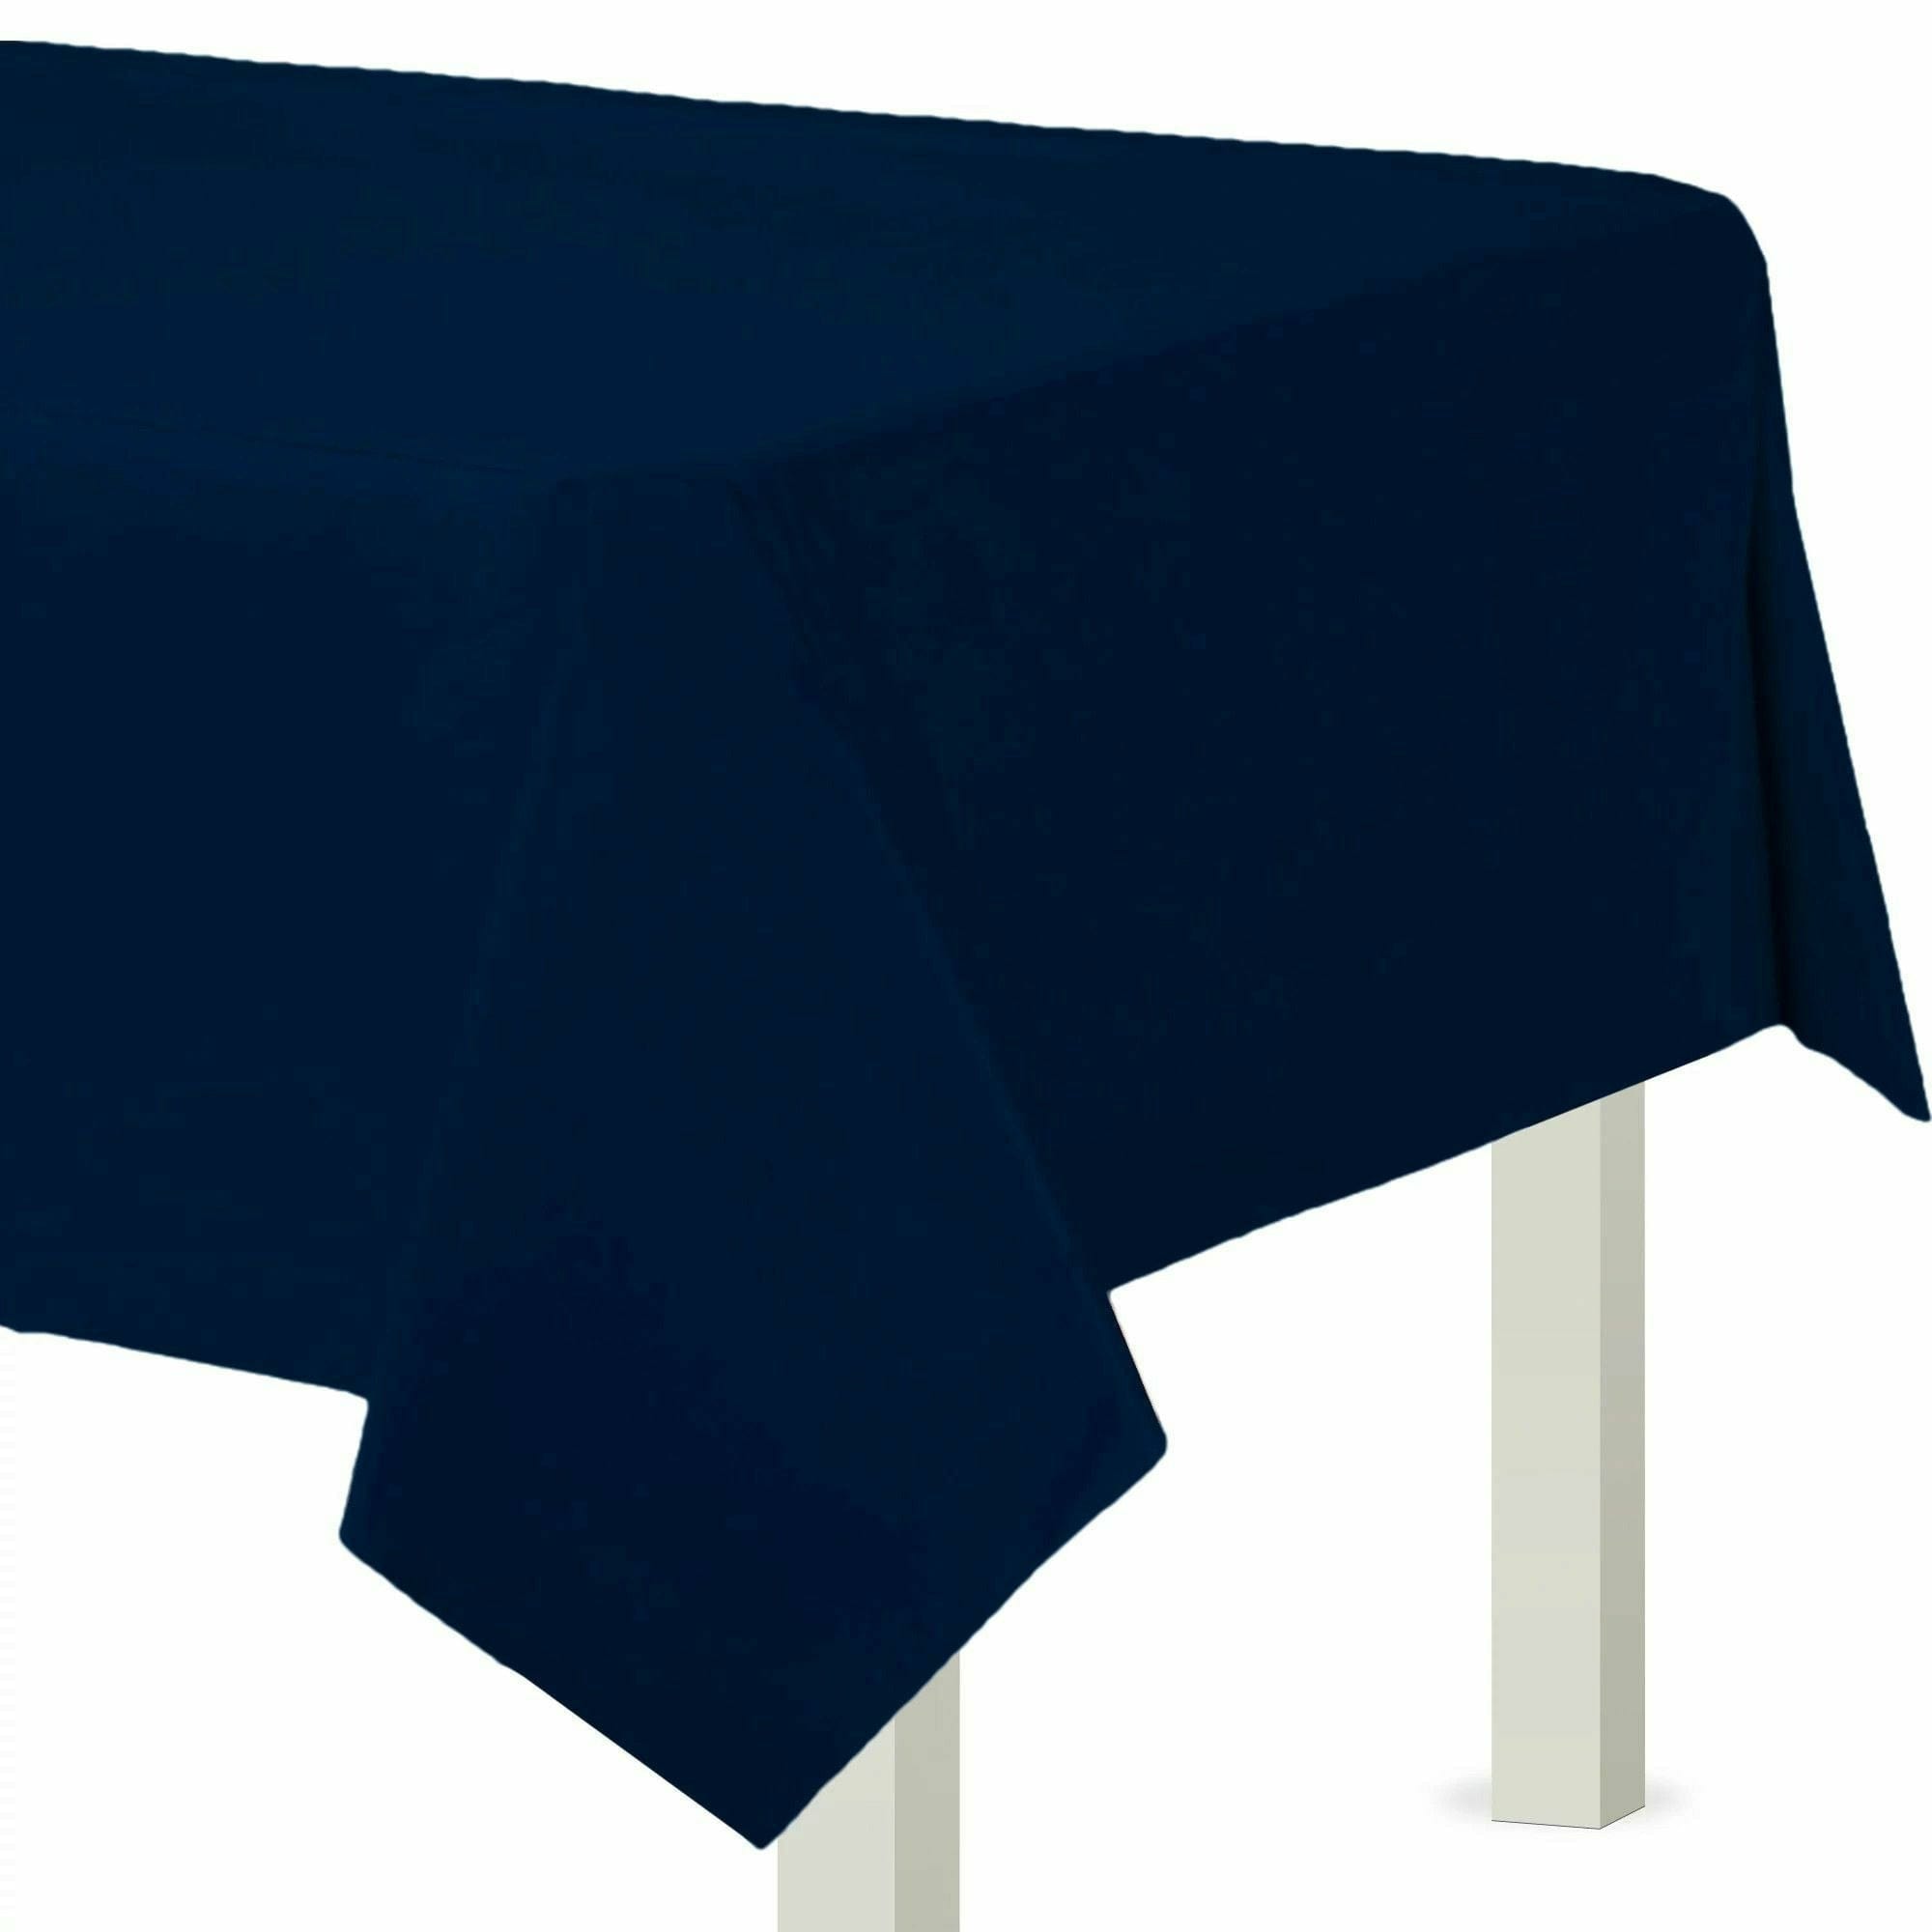 Amscan BASIC True Navy - Flannel Backed Table Cover